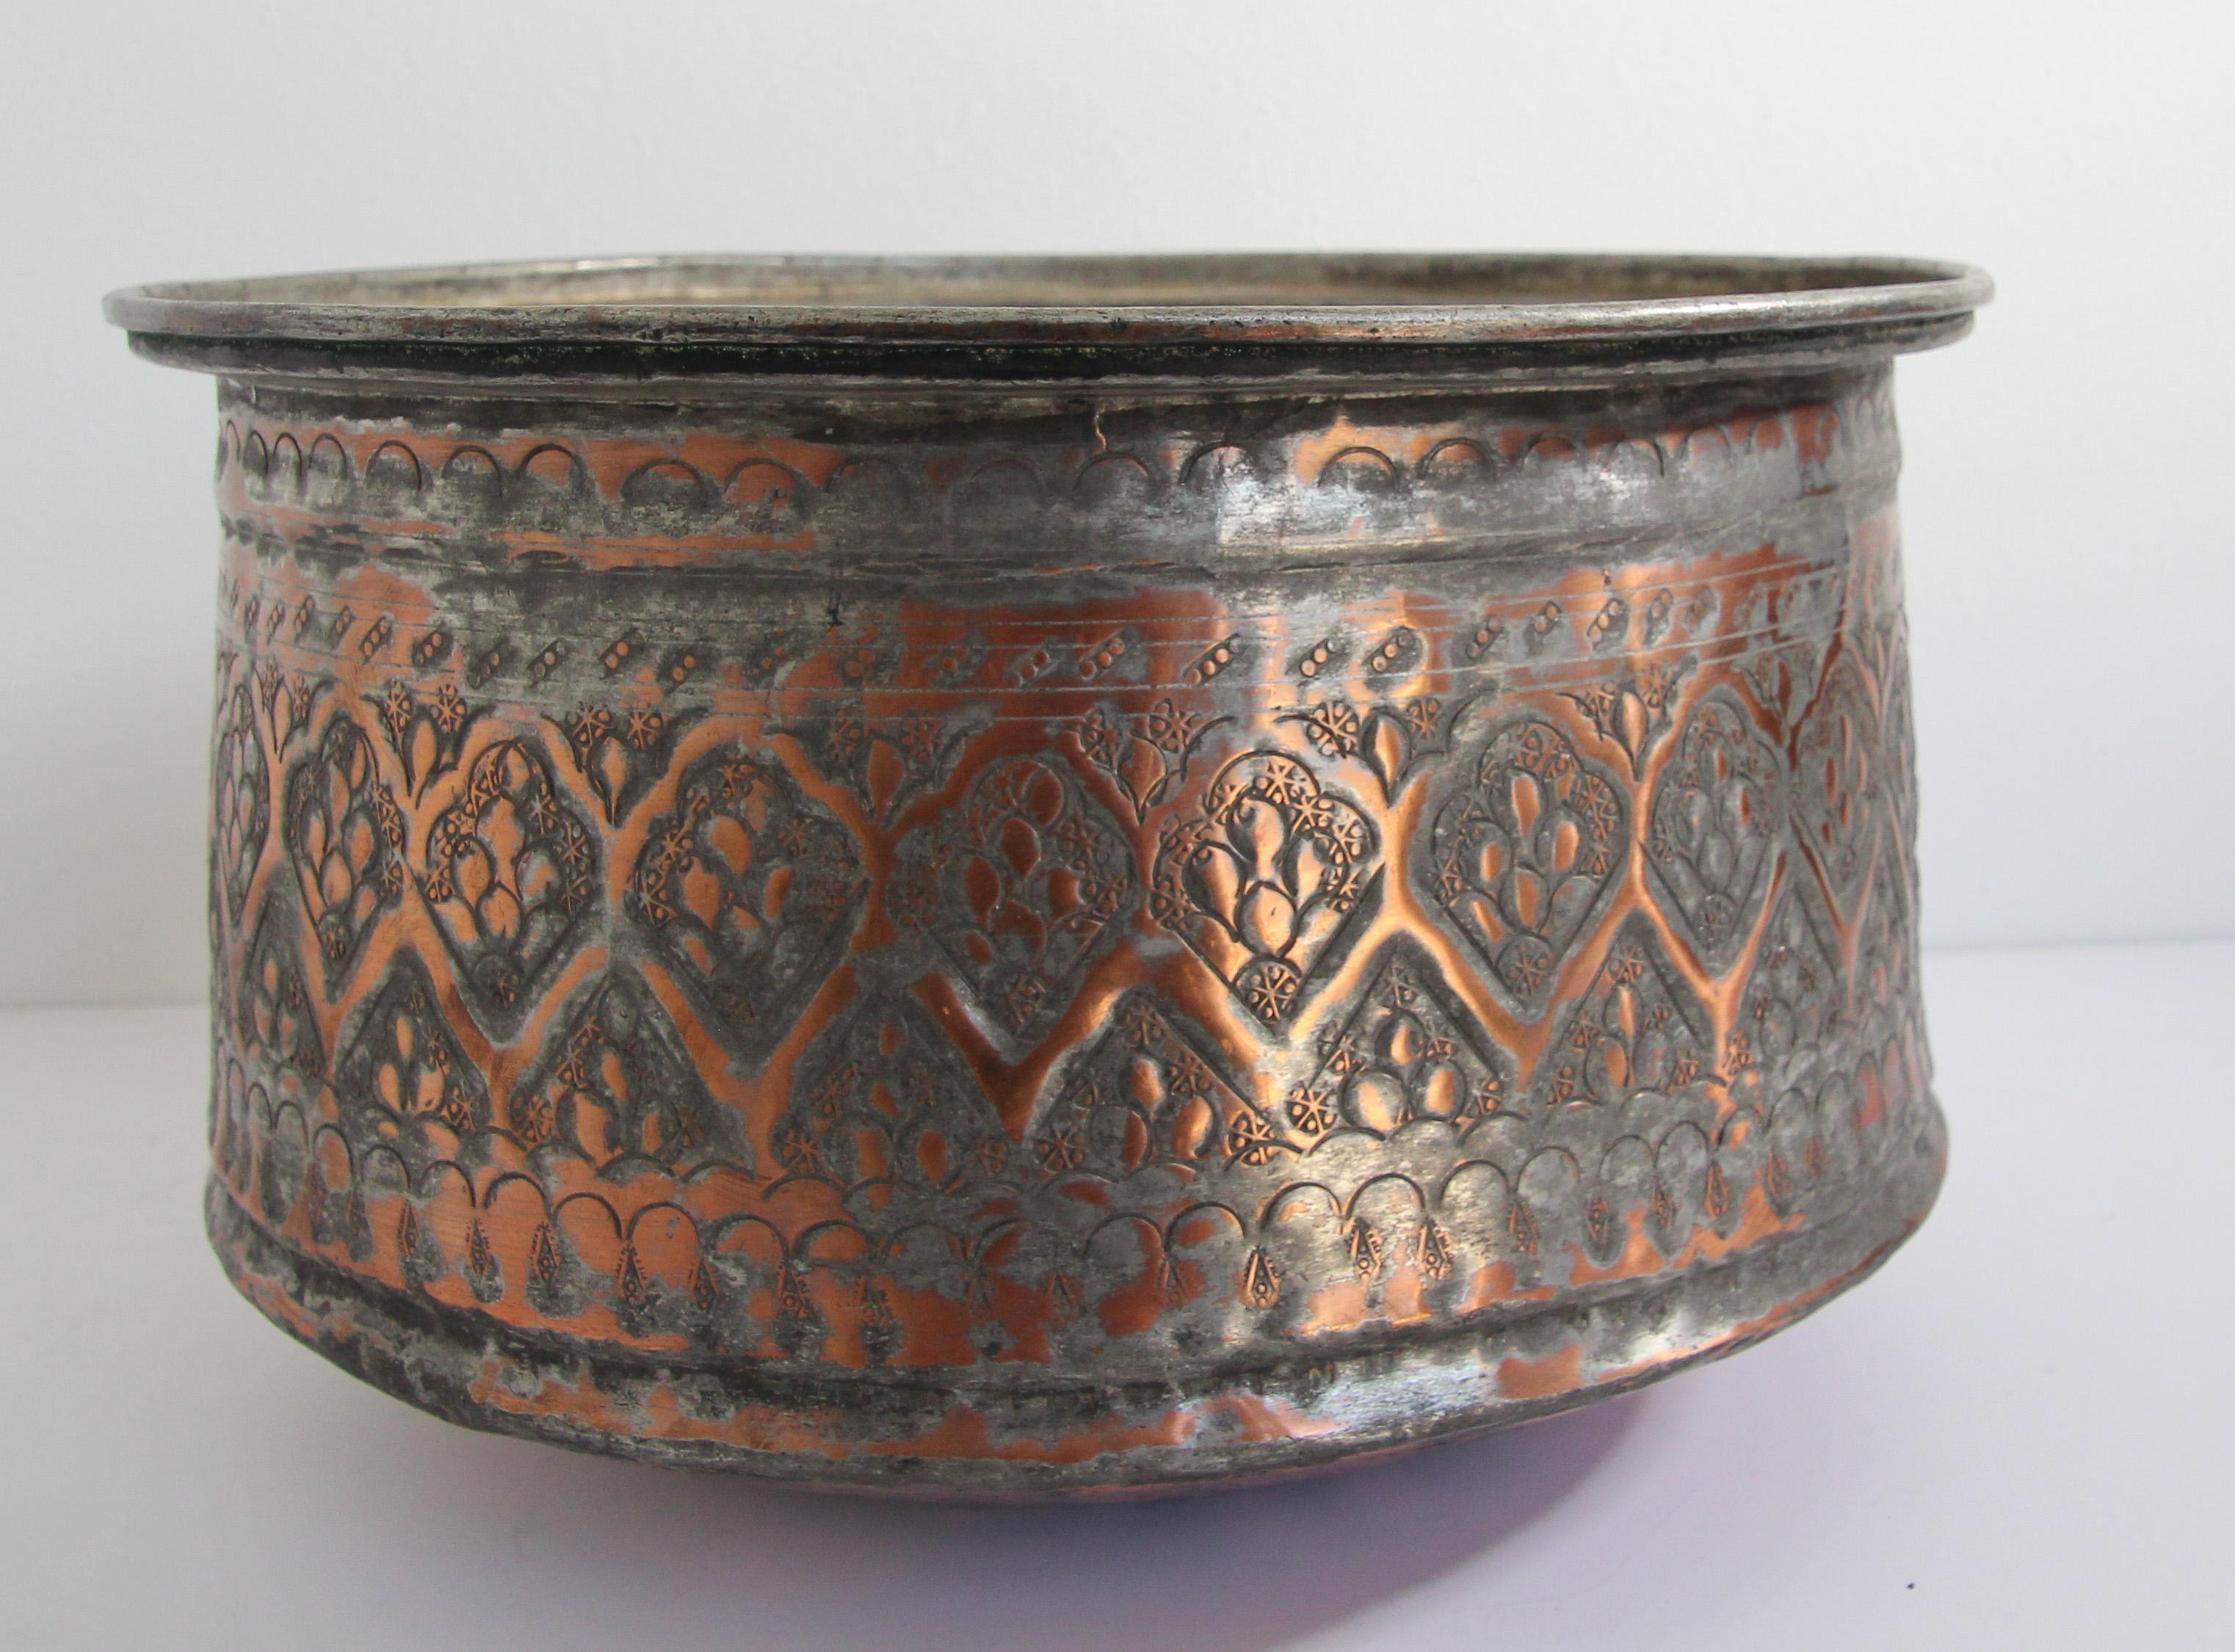 Large 19th century tinned copper Indo Persian Mughal copper bowl vessel.
Great patina on handcrafted and embossed metal tin copper bowl with floral geometric designs
Antique patina.
Early 19th century, Mughal style, great Islamic Art, Museum